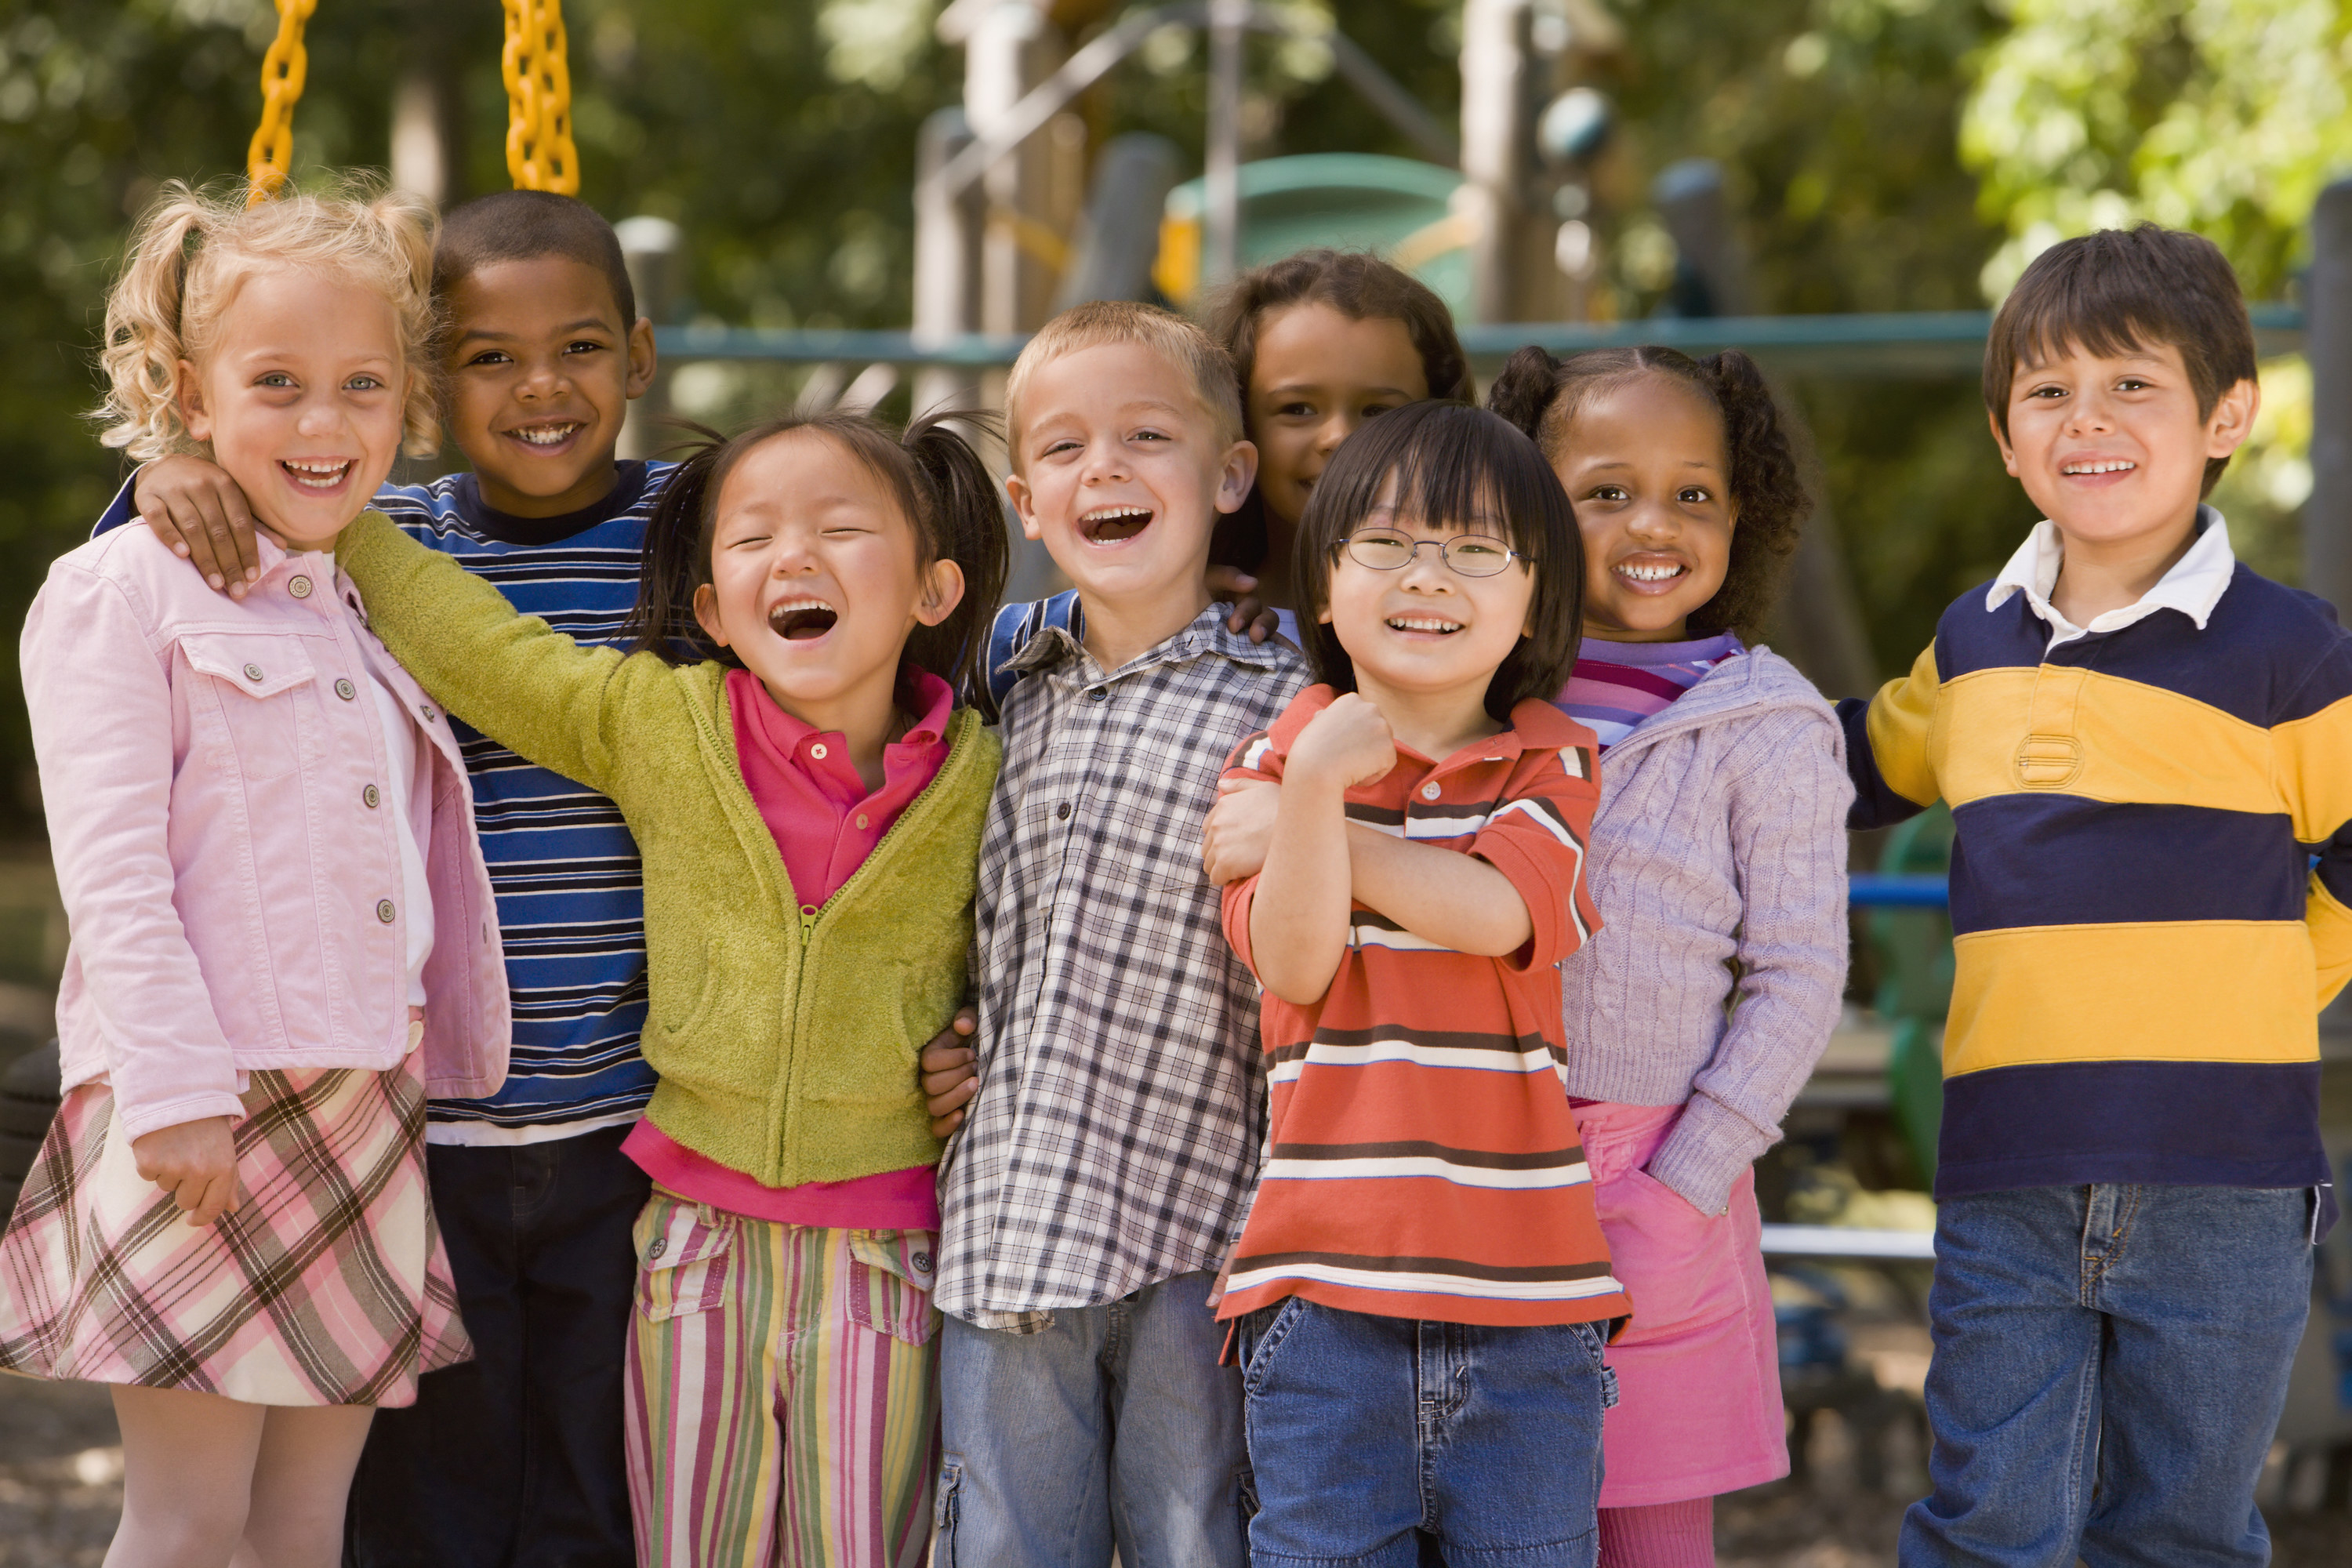 A group of five-year-old children smile on a playground